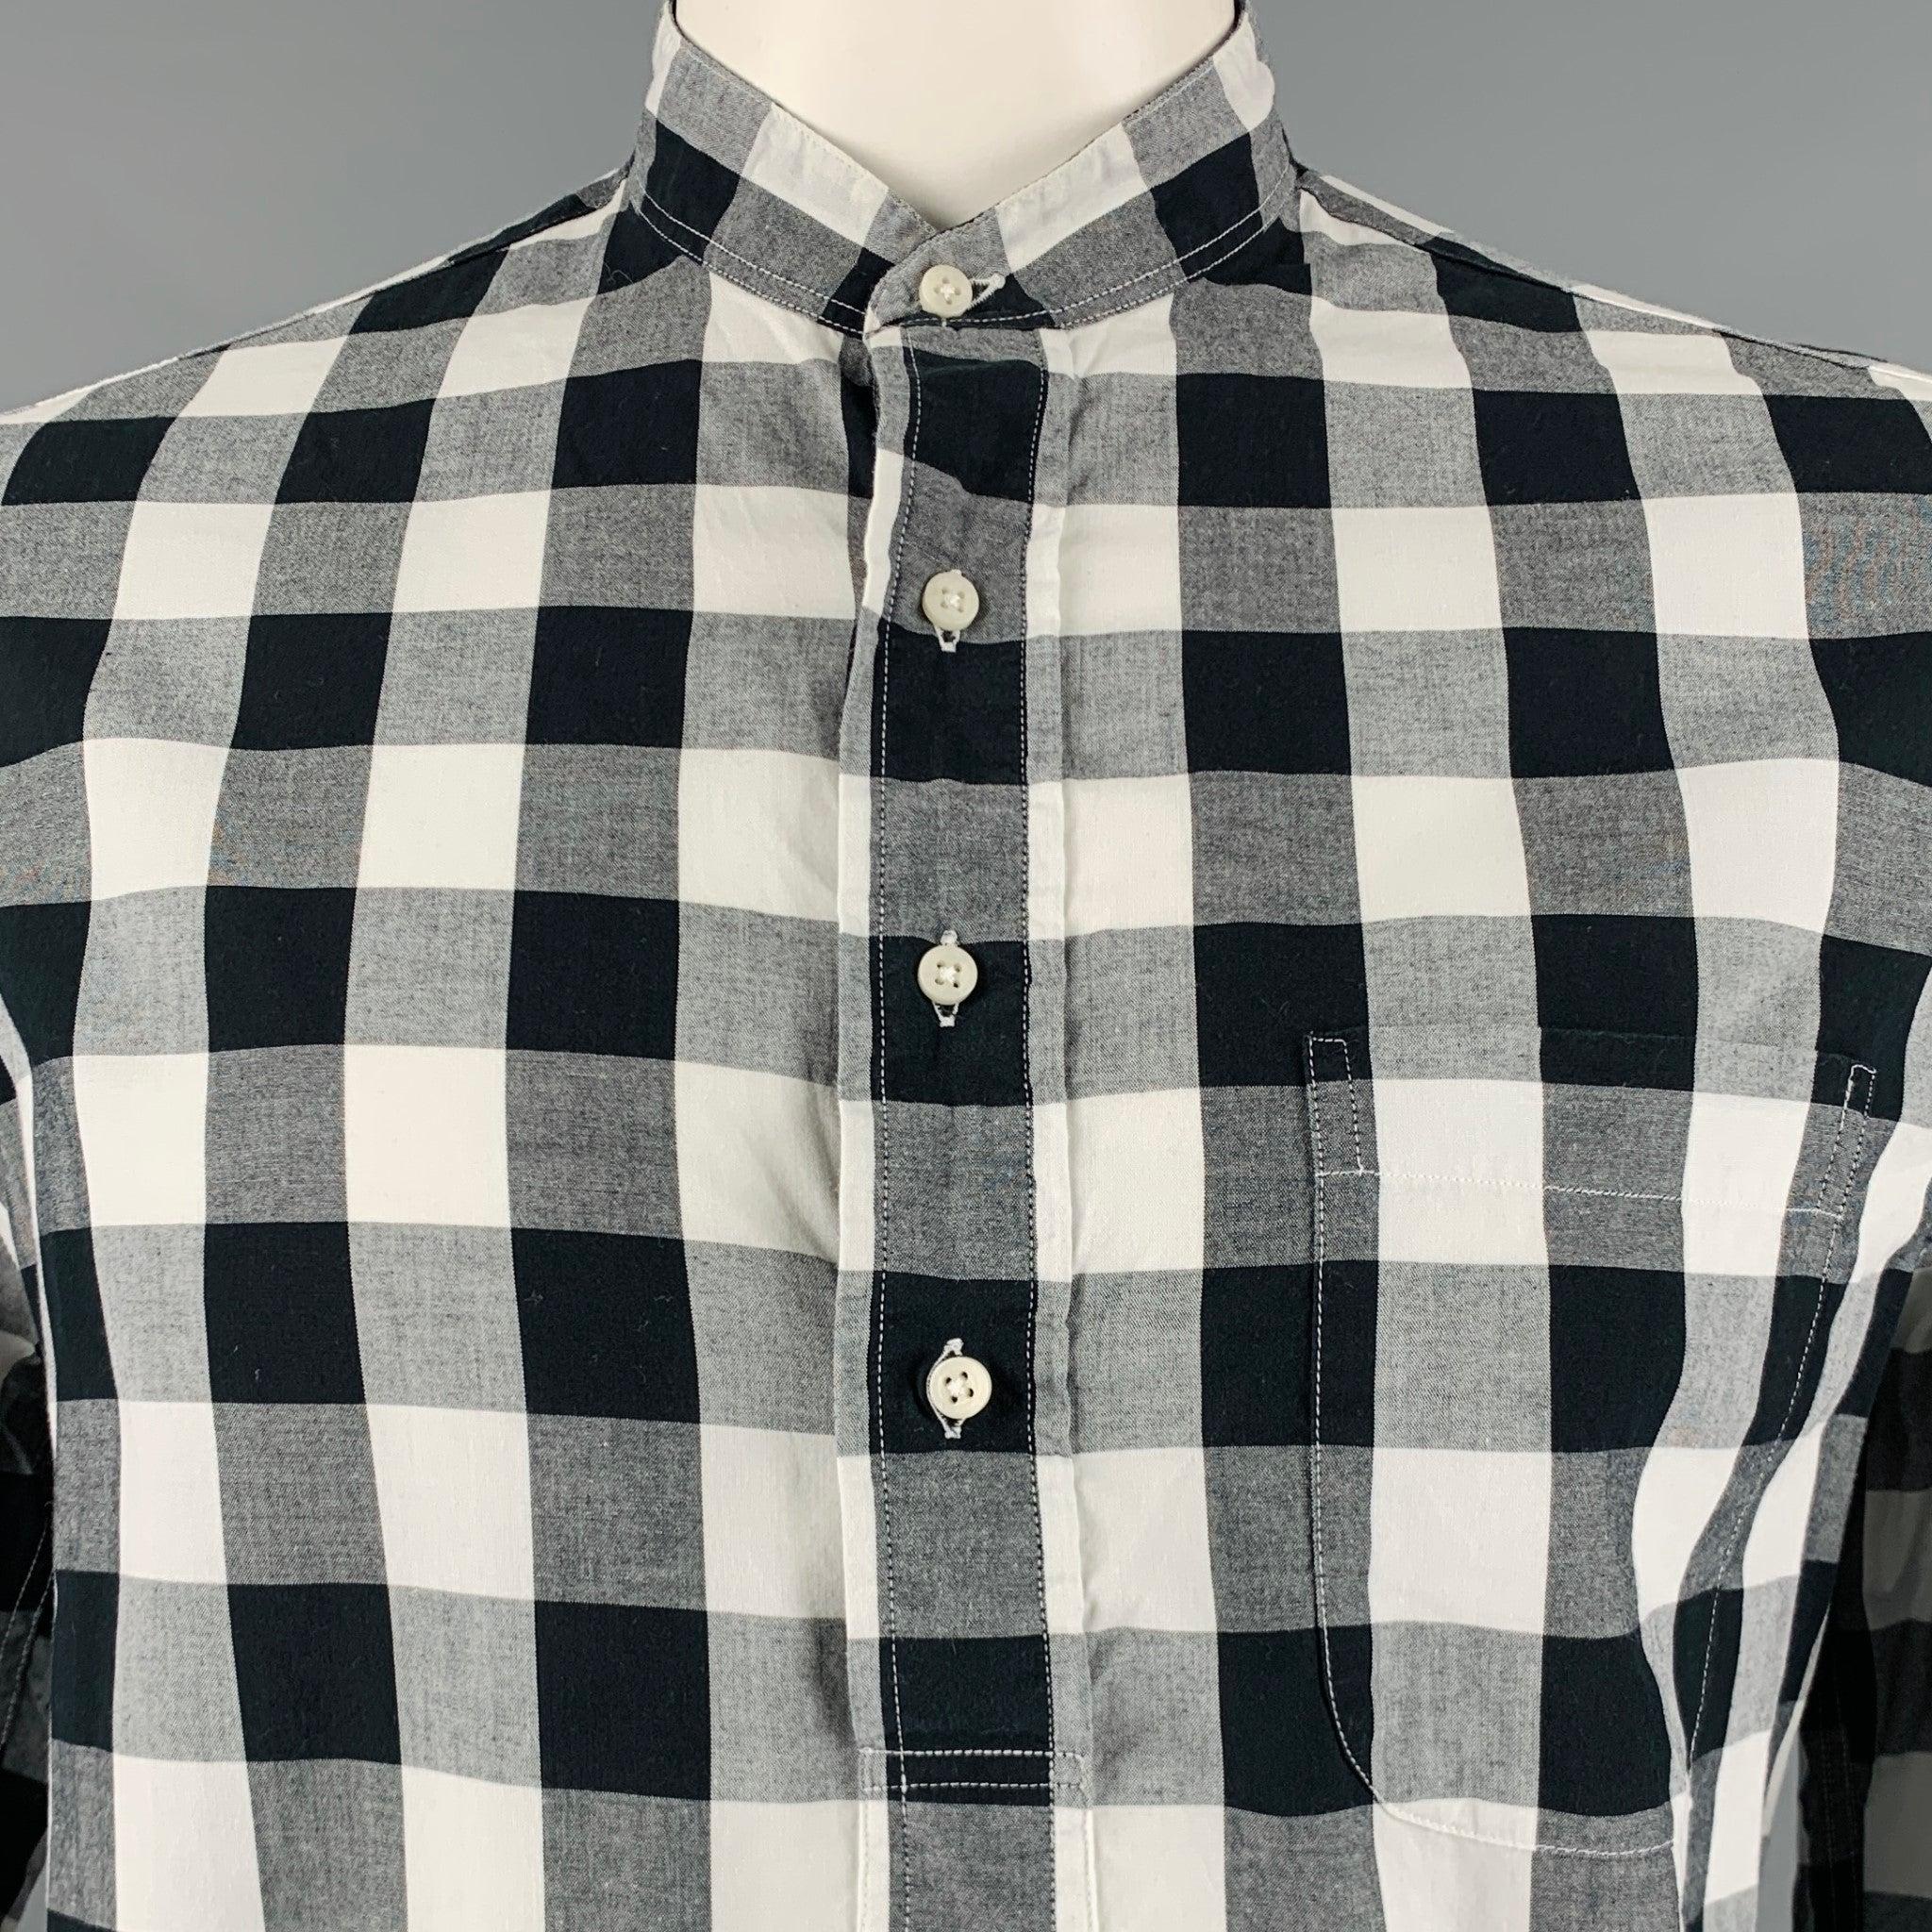 GITMAN VINTAGE long sleeve shirt
in a
black and white cotton fabric featuring a tunic style, buffalo plaid pattern, and half placket button closure. Made in USA.Excellent Pre-Owned Condition. 

Marked:   L 

Measurements: 
 
Shoulder: 17 inches